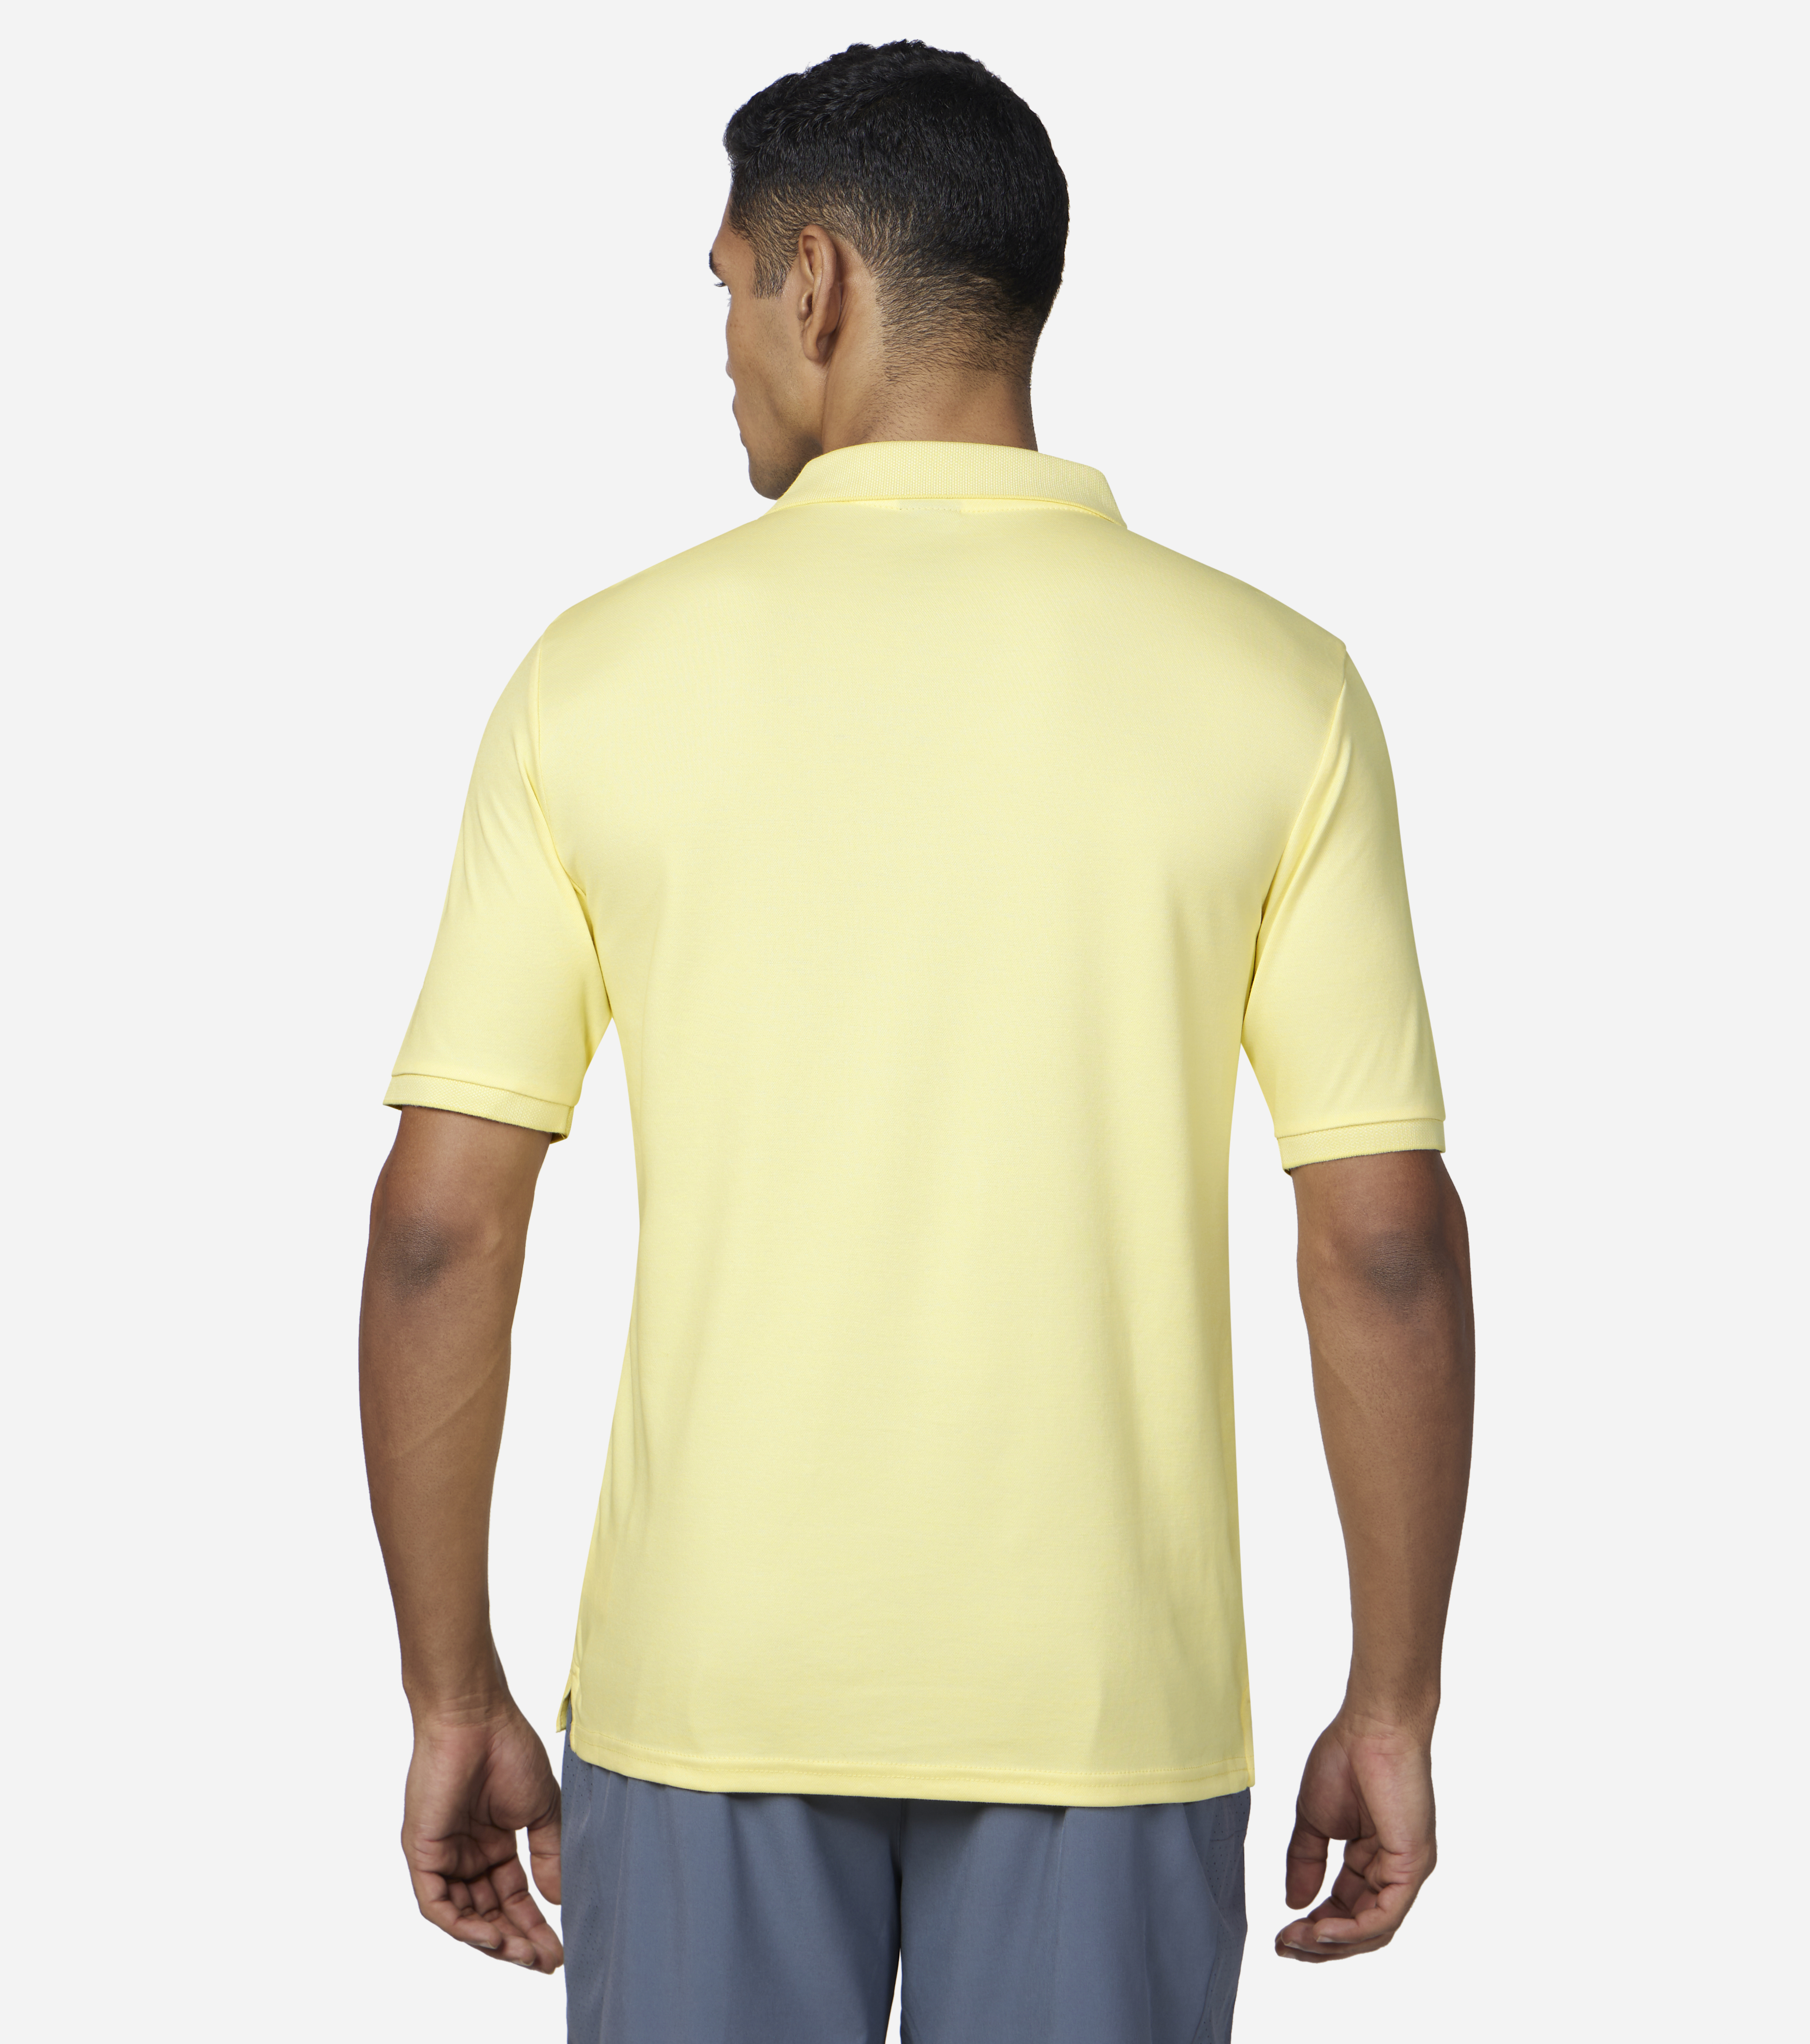 OFF DUTY POLO, LIGHT GREY/YELLOW Apparels Bottom View